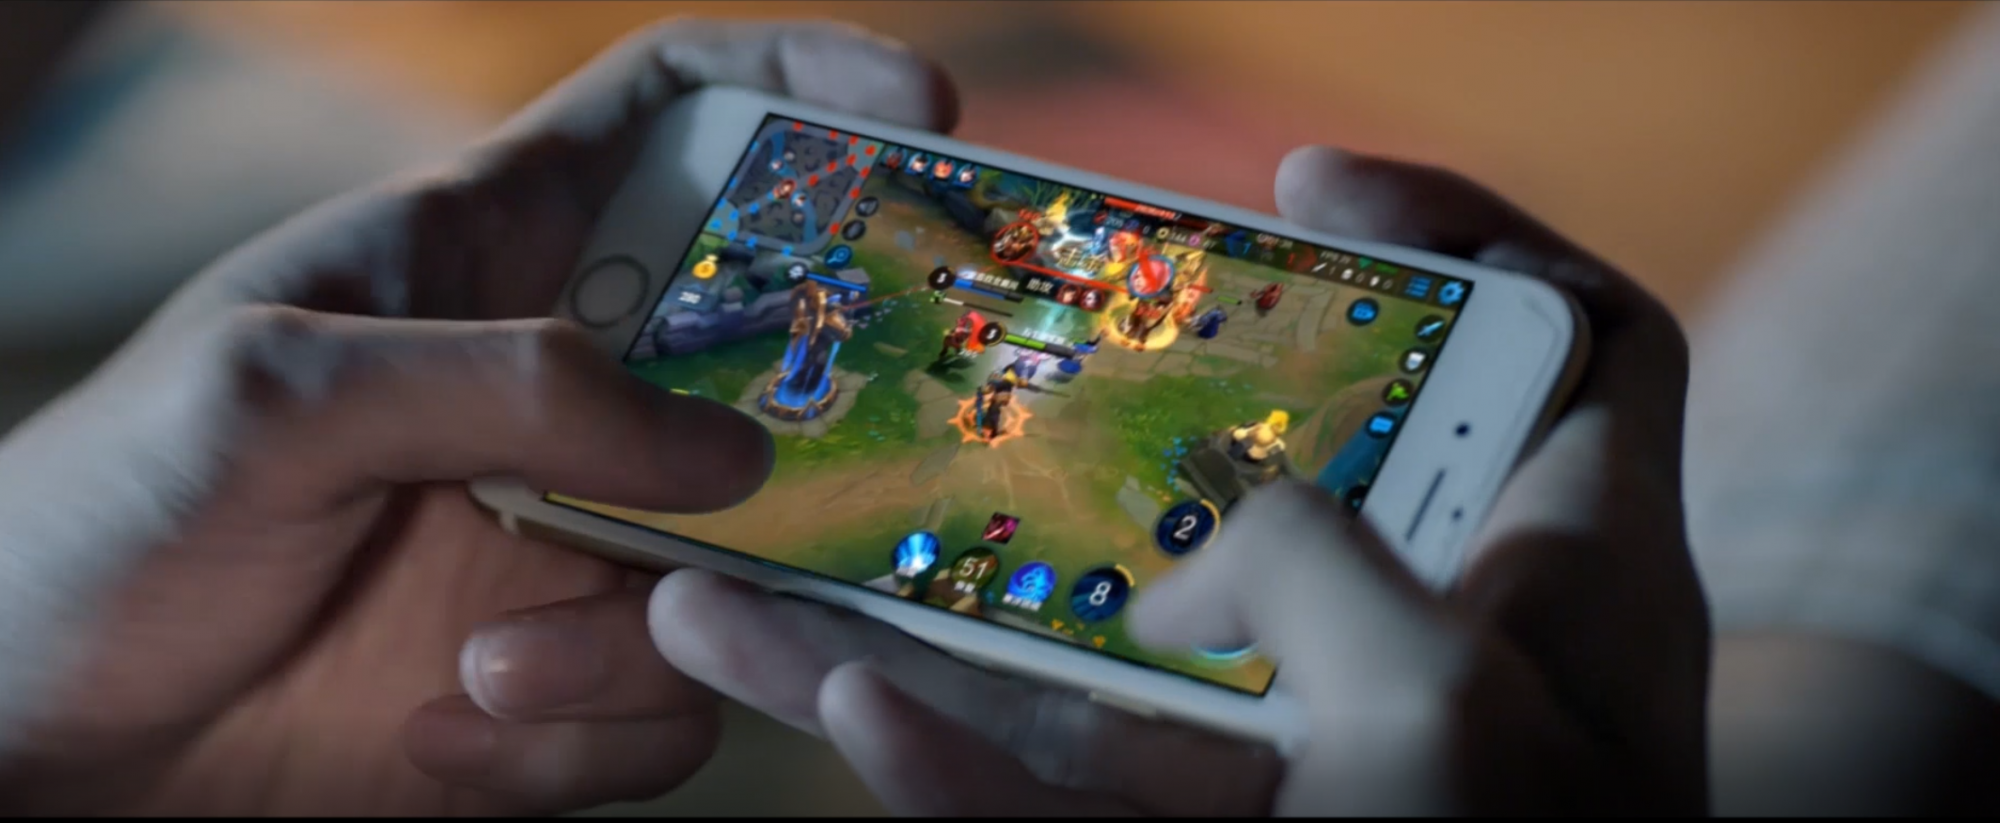 Honor of Kings becomes the most popular mobile game globally: Everything to  know about it